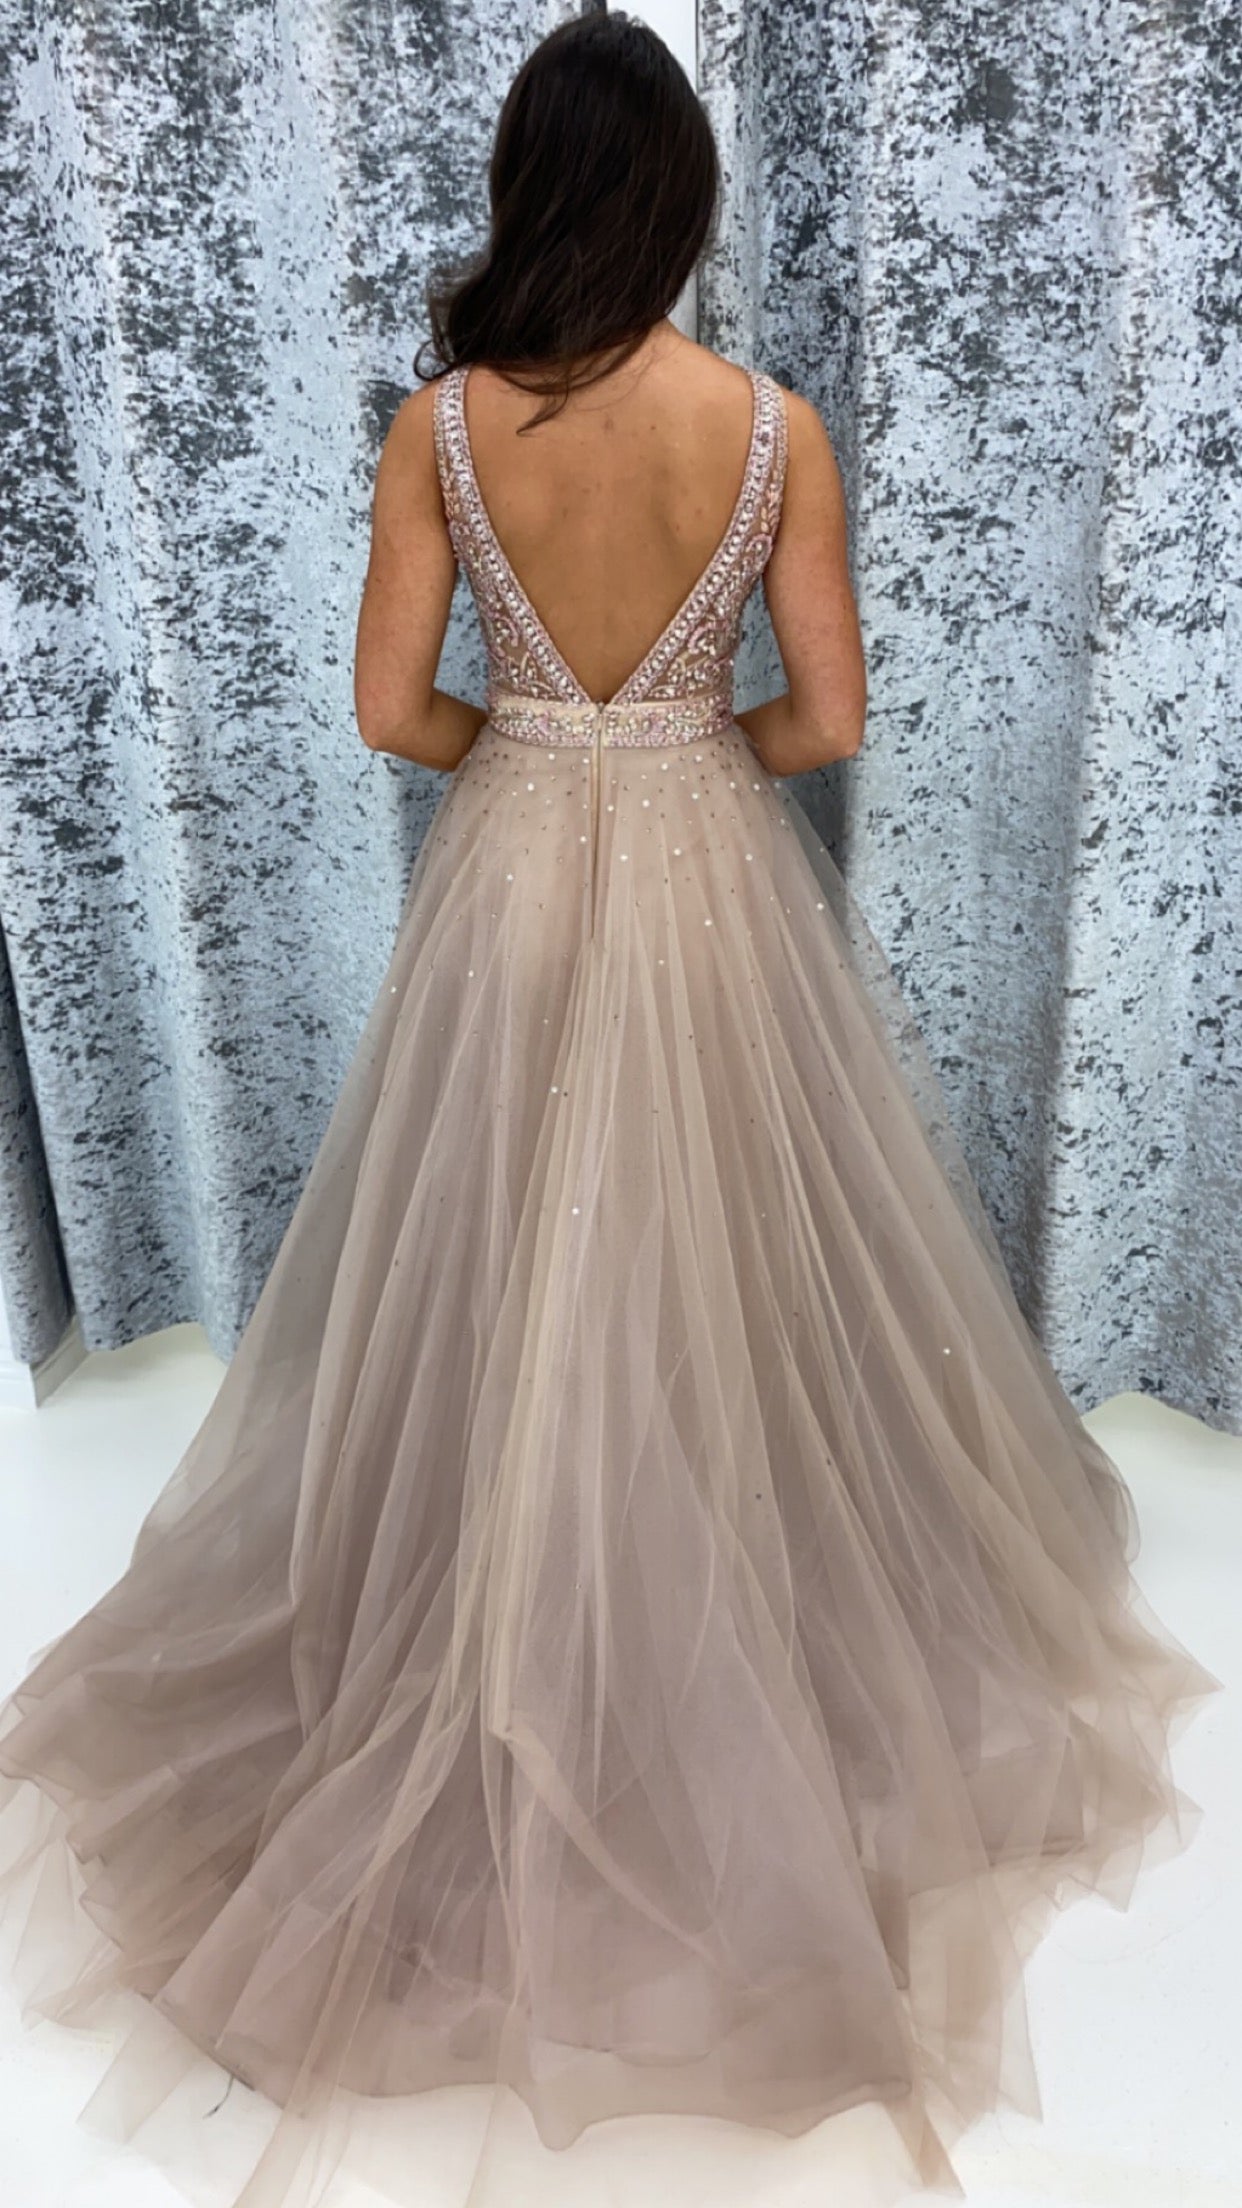 Champagne/Nude Ball Gown